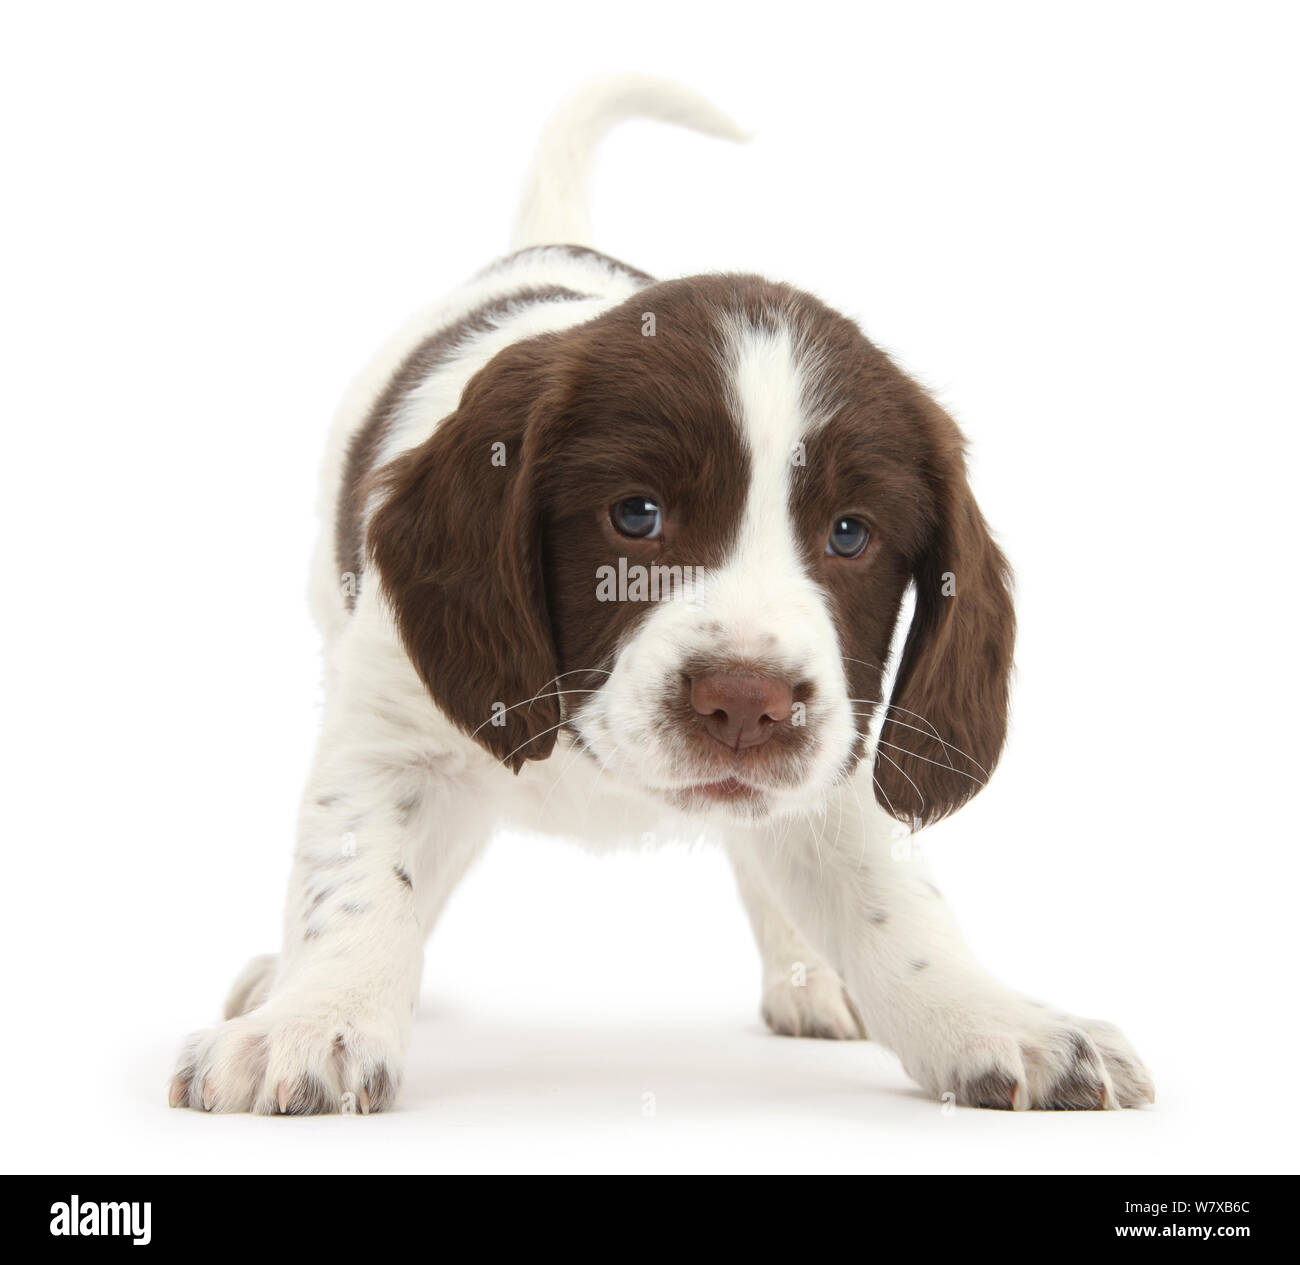 Working English Springer Spaniel puppy, 6 weeks, in playful stance Stock  Photo - Alamy